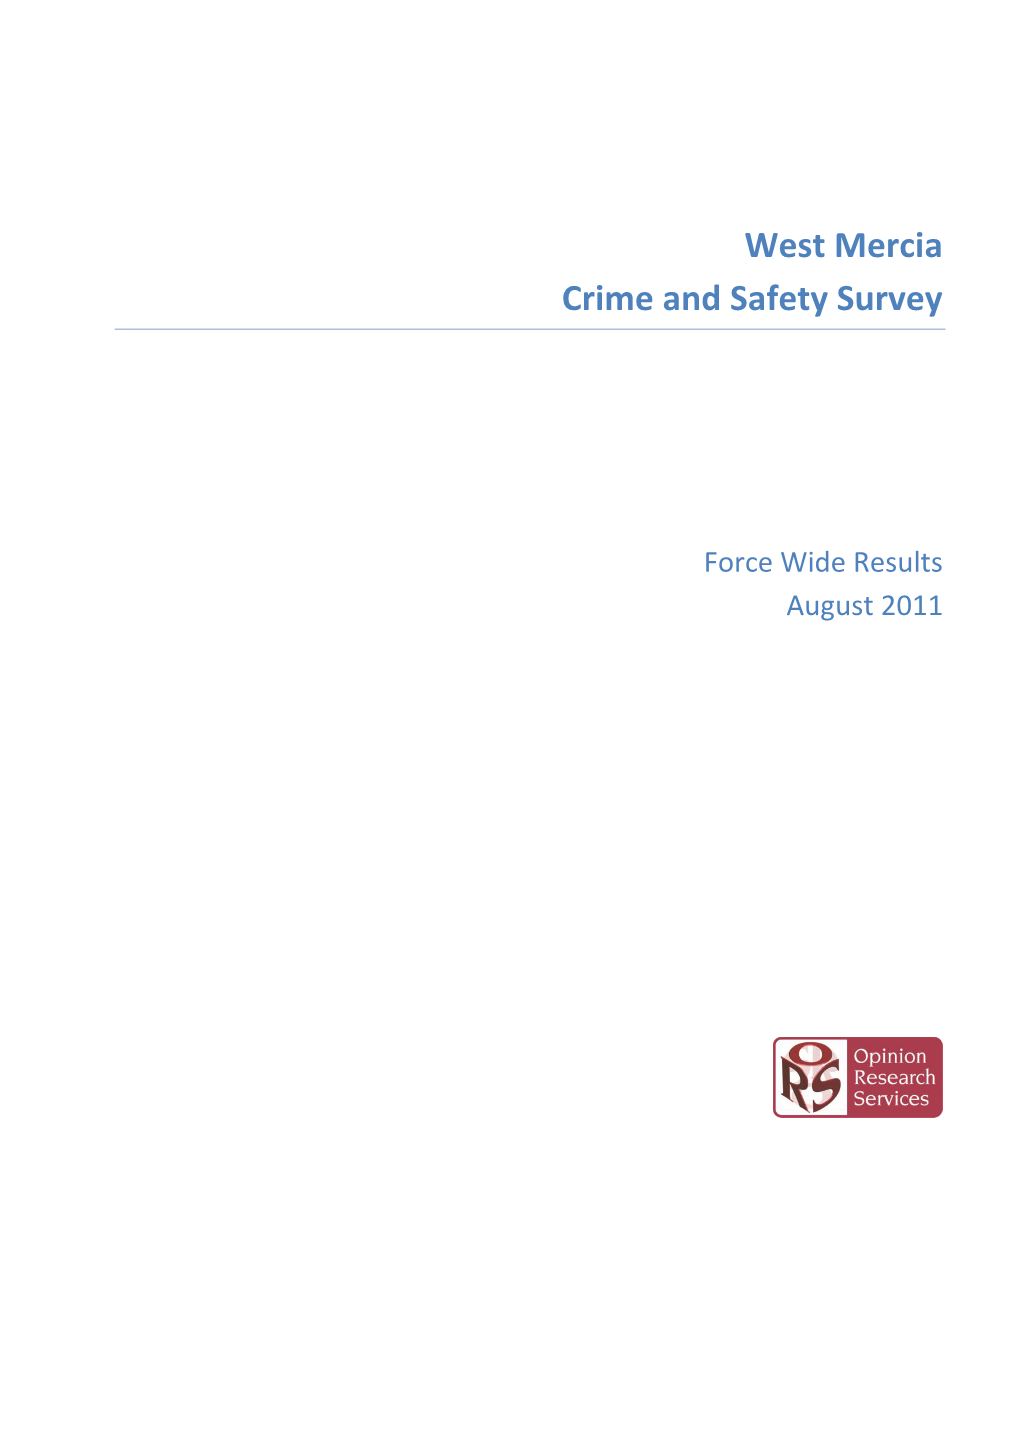 West Mercia Crime and Safety Survey